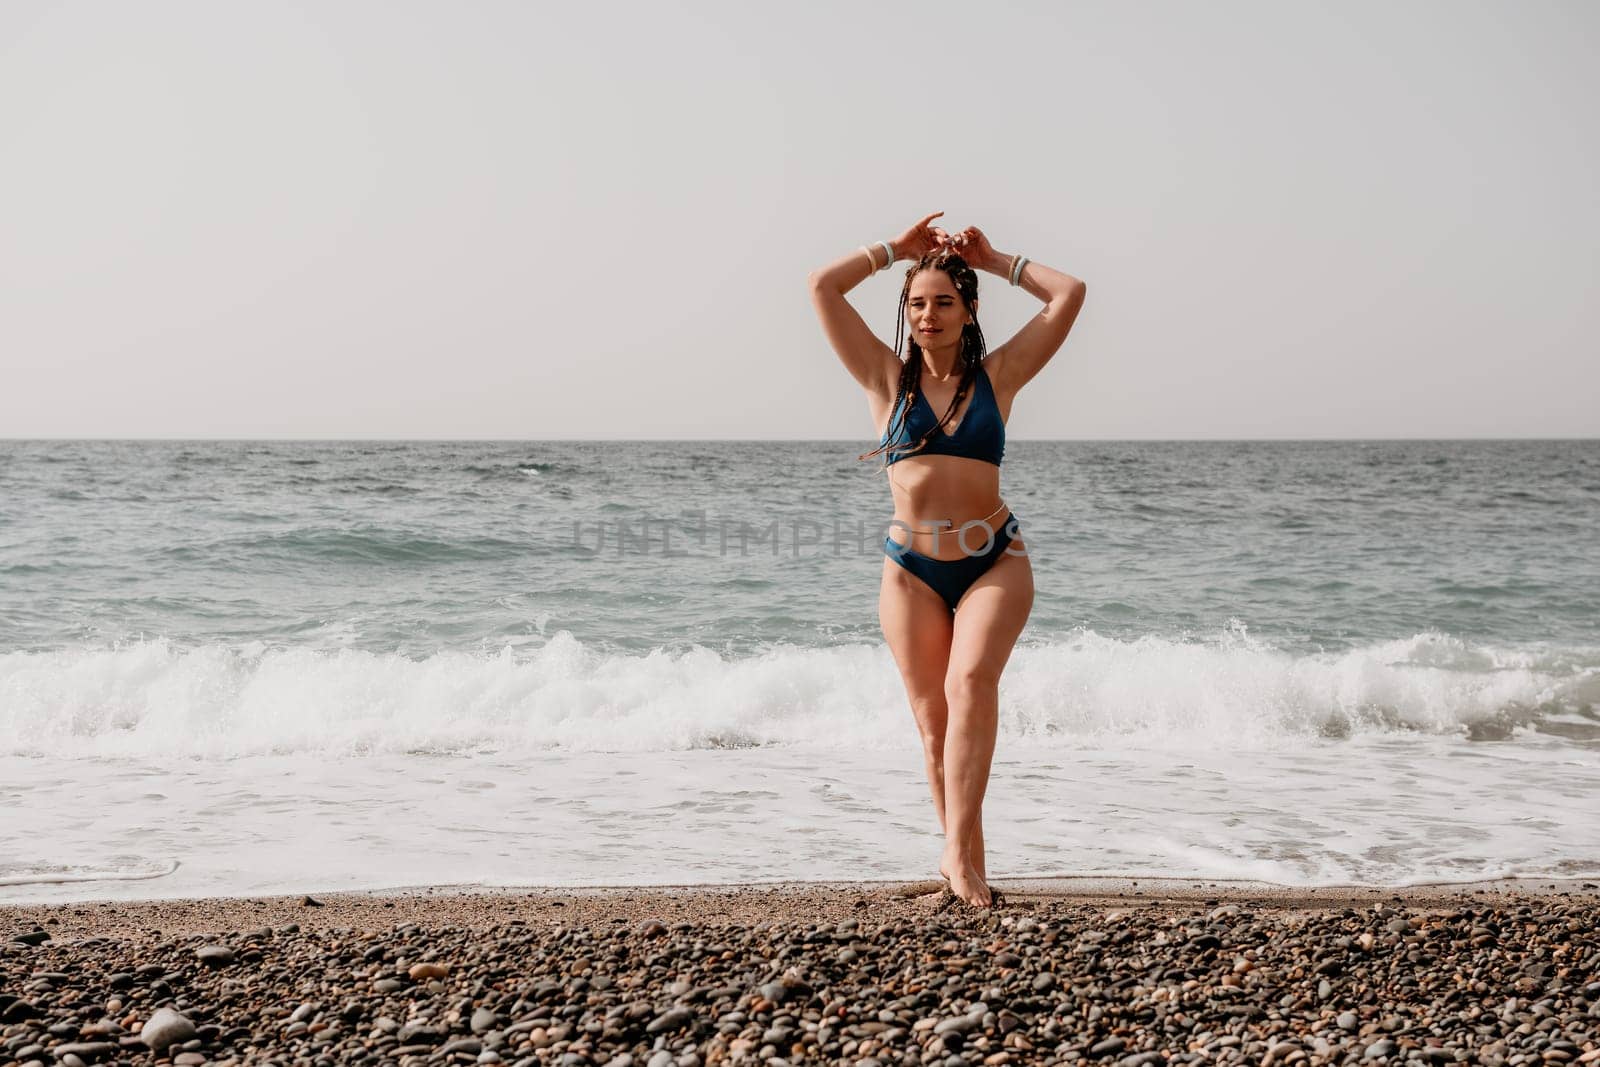 A tourist woman in blue bikini on beach enjoys the turquoise sea during her summer holiday. Rear view. Beach vacation. woman with braids dreadlocks standing with her arms raised enjoying beach ocean. by panophotograph